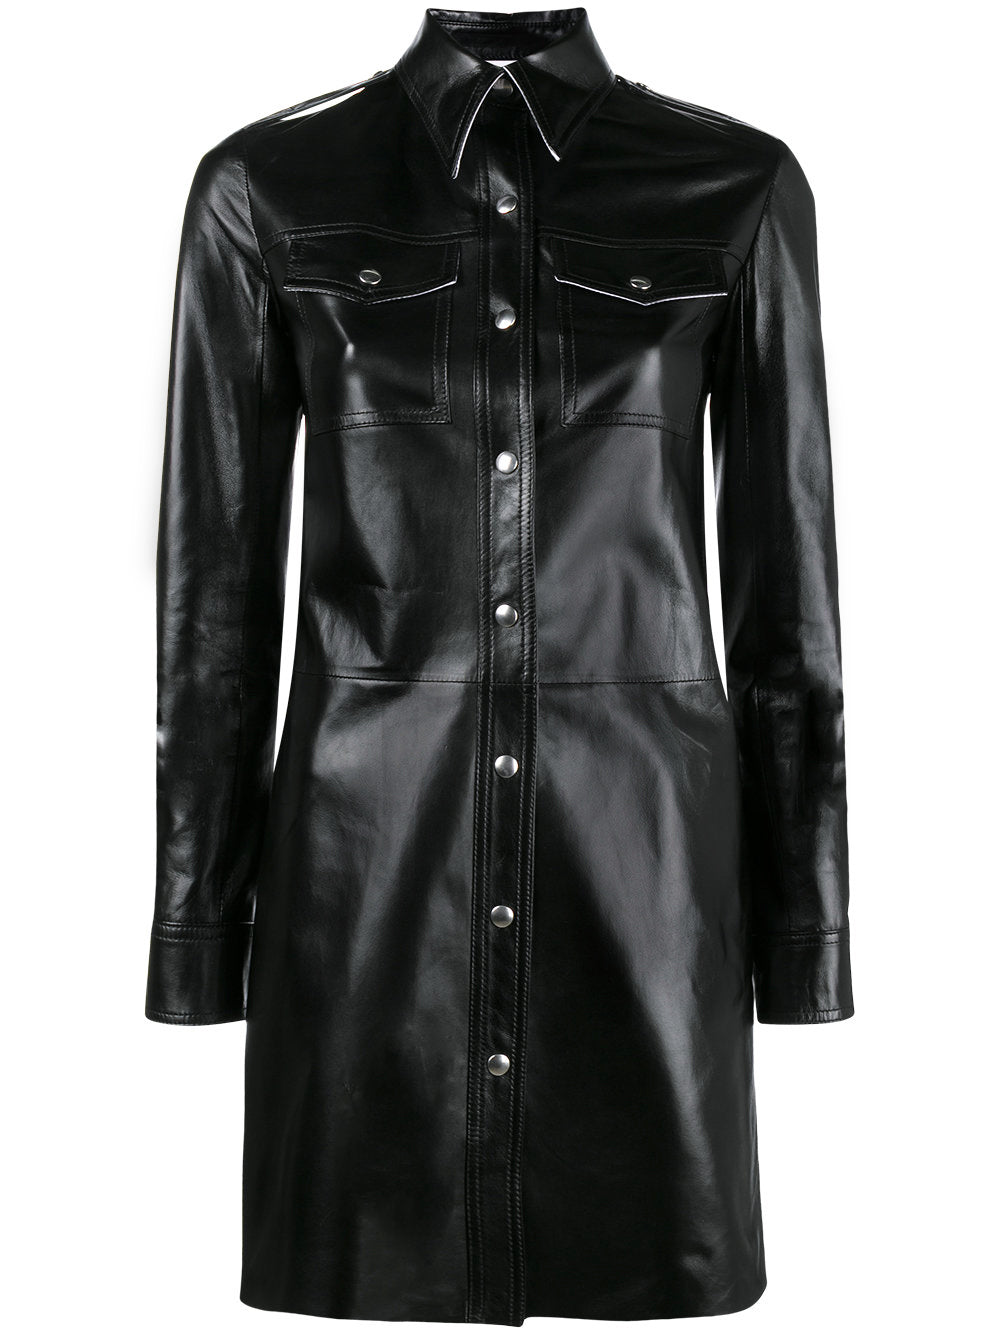 Leather Jackets Hub Womens Genuine Cowhide Leather Over Coat (Black, Long Coat) - 1822009